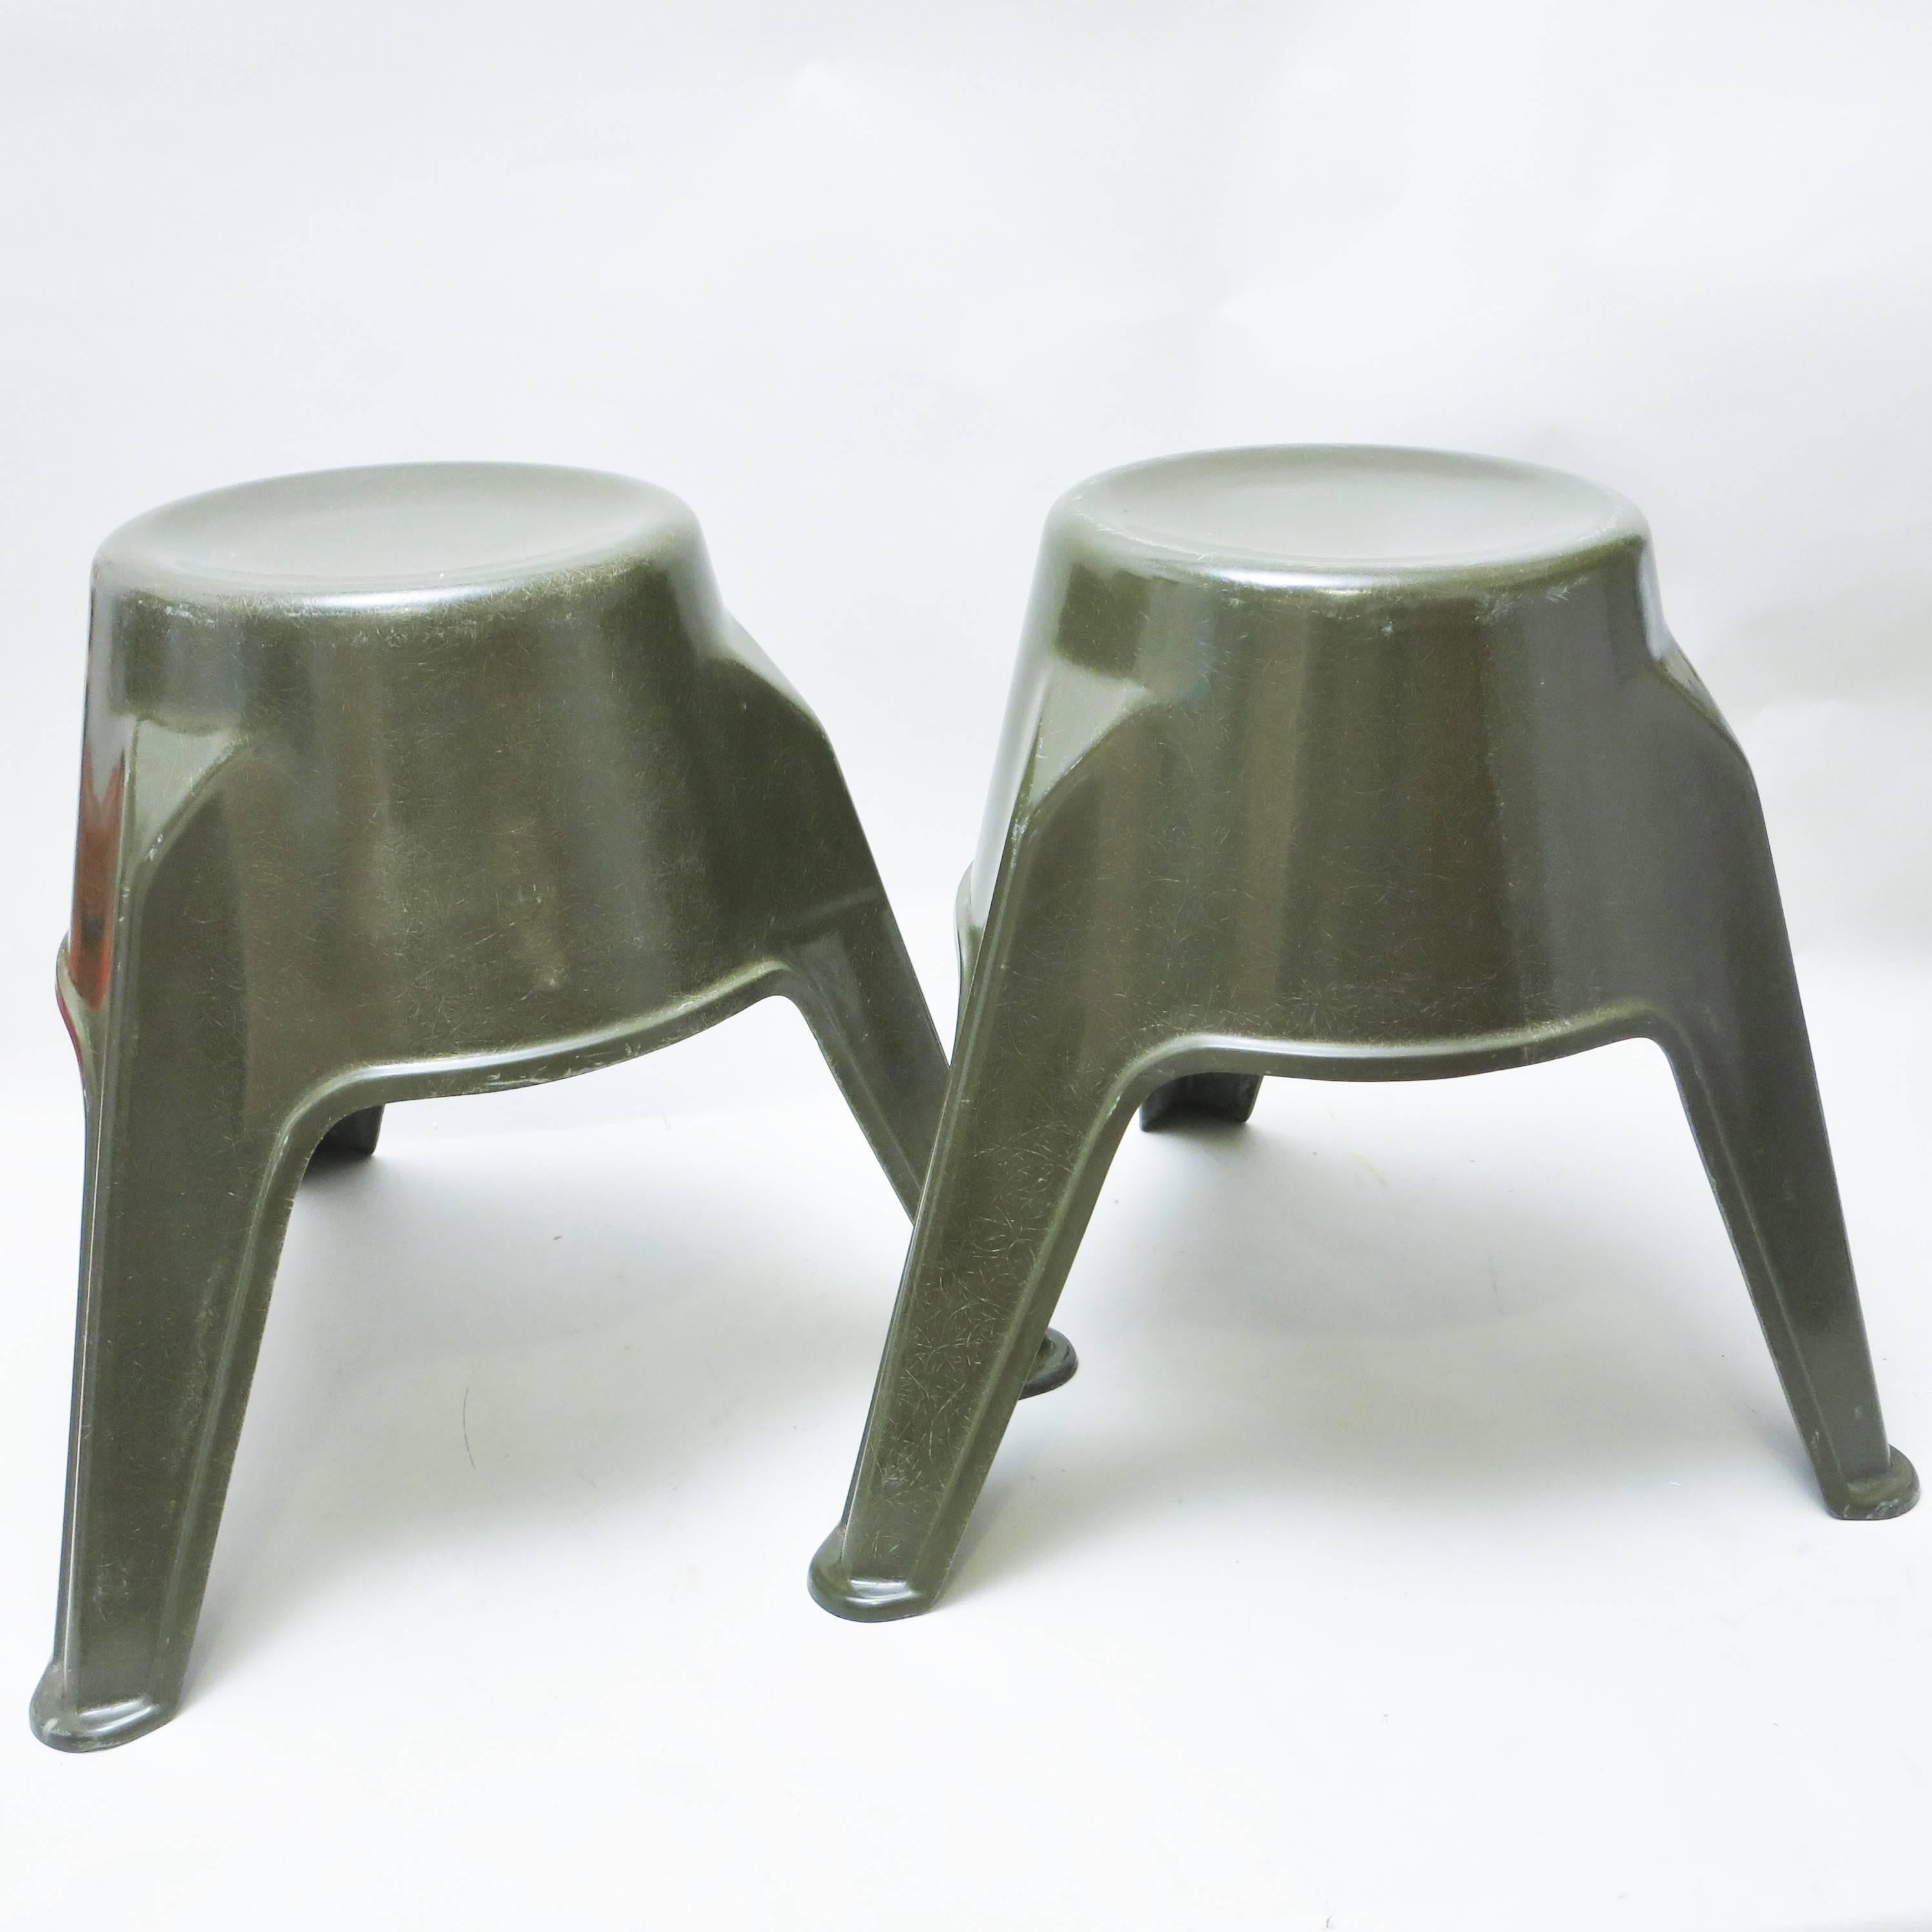 Rare pair of Mid-Century Modern stackable stools in olive green fiberglass. German work of the 1960s.
Work perfectly as bedside tables.